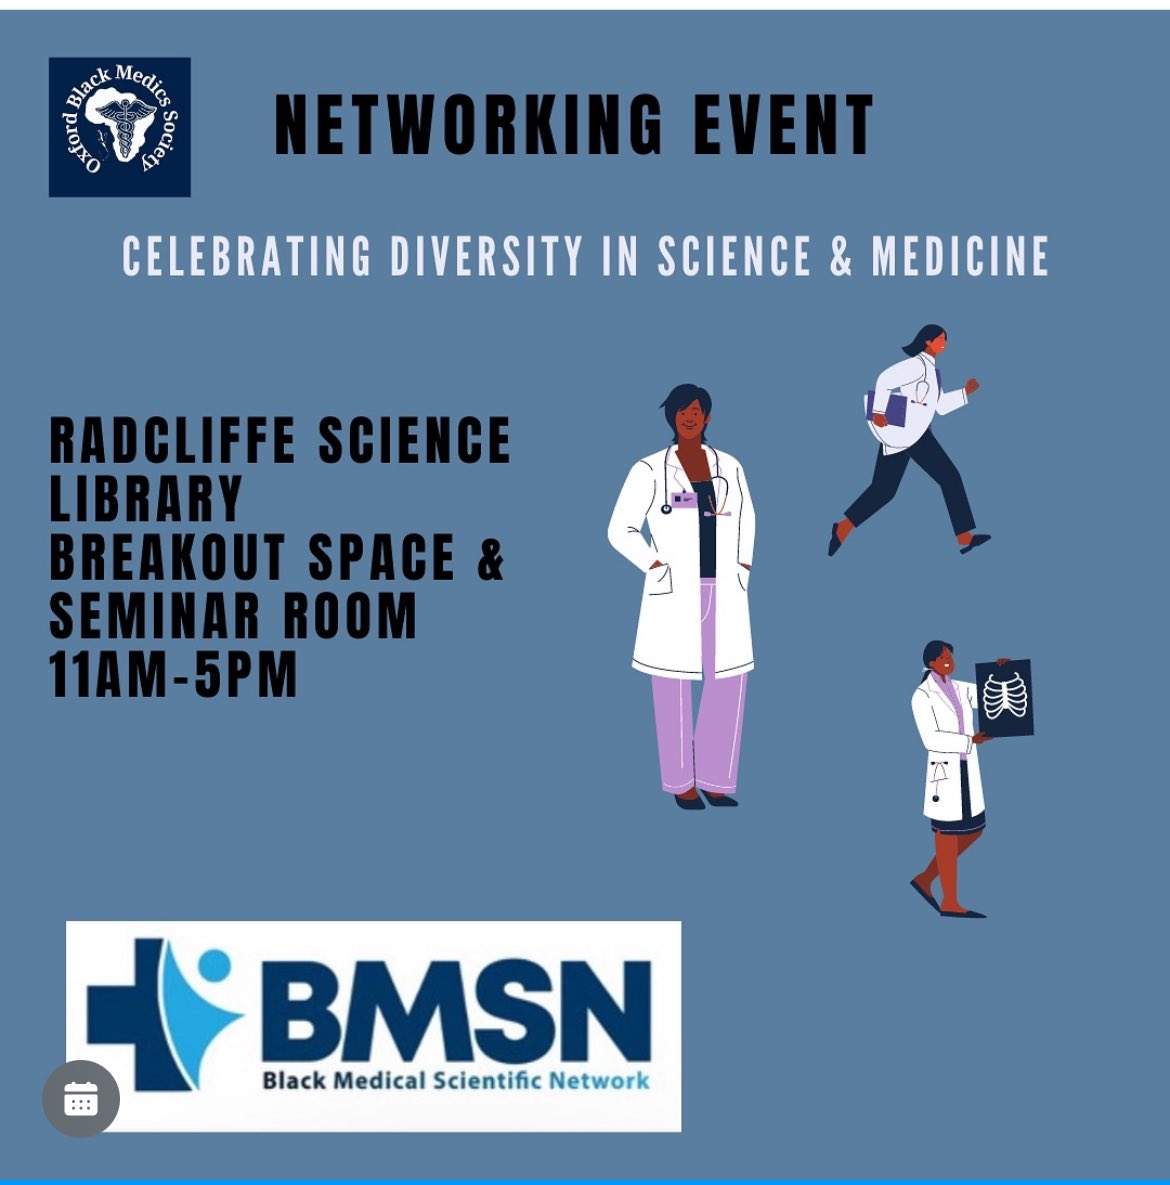 We are looking forward to this networking event next week in Oxford where we will be showcasing the portraits of black female scientist. If you are in Oxford do stop by. #diversityinscience #oxforduniversity #portraitsofblackfemalescientist